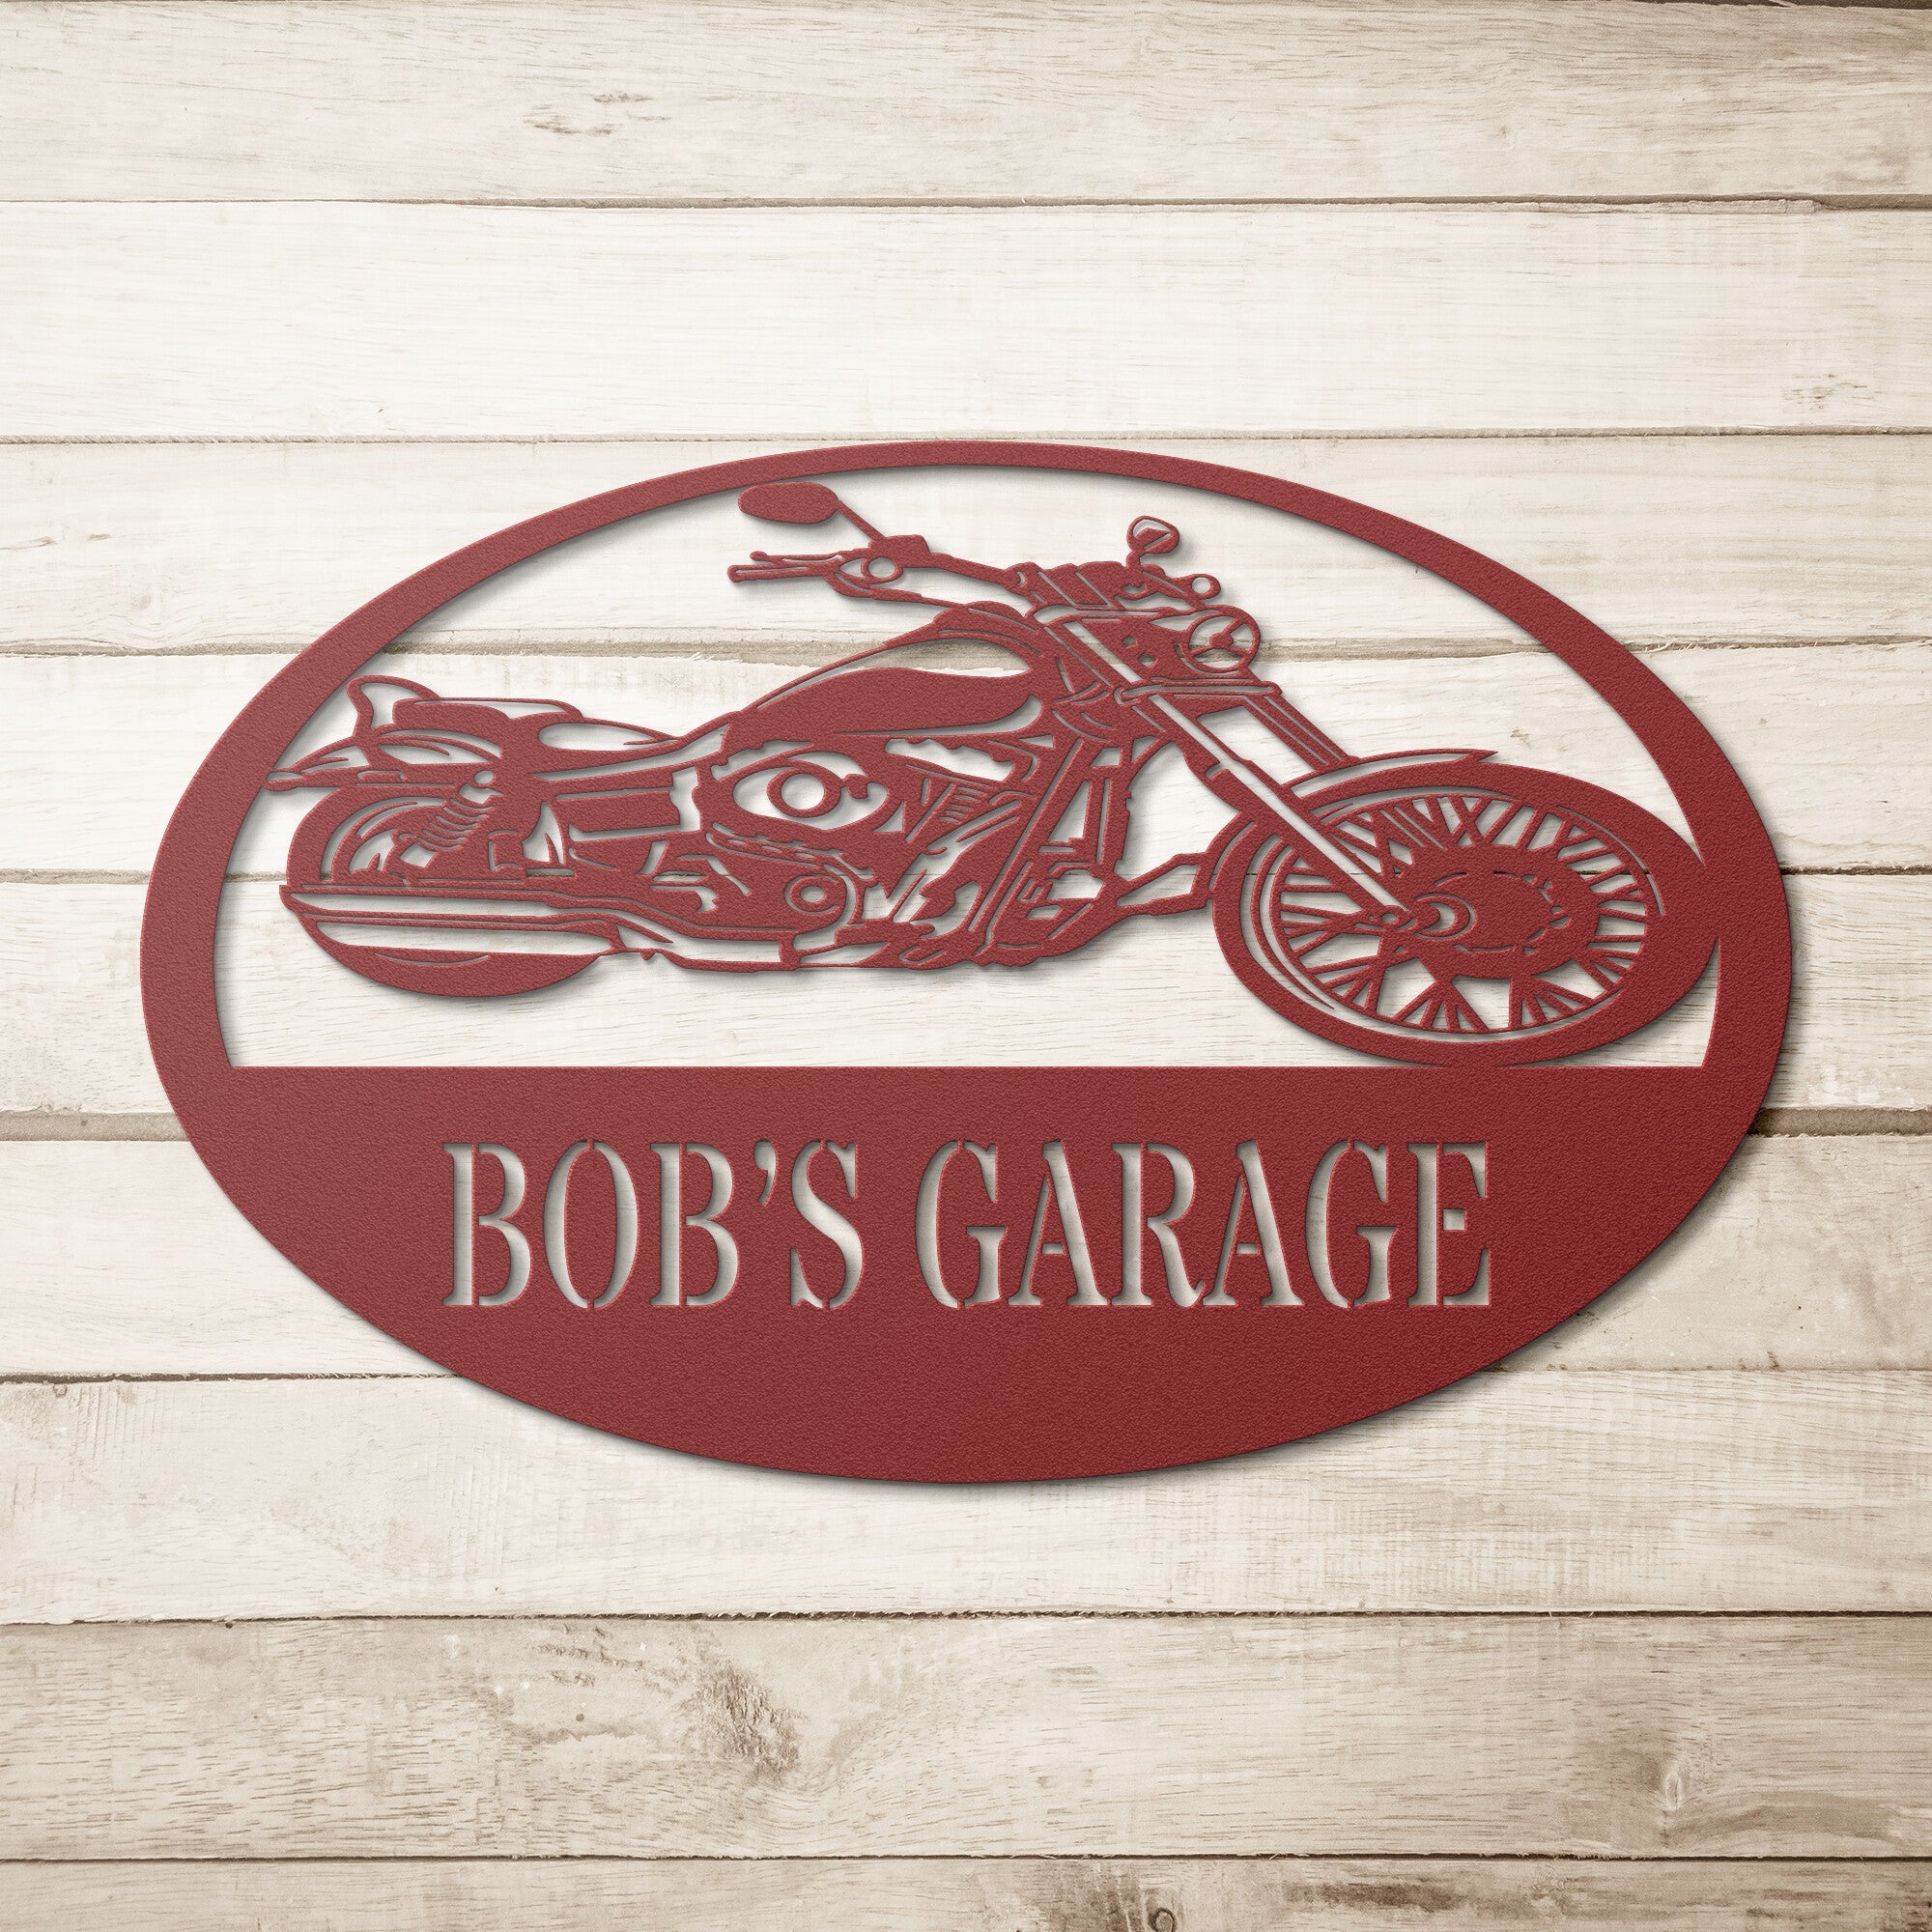 Personalized Chopper Motorcycle Sign - Cool Metal Signs